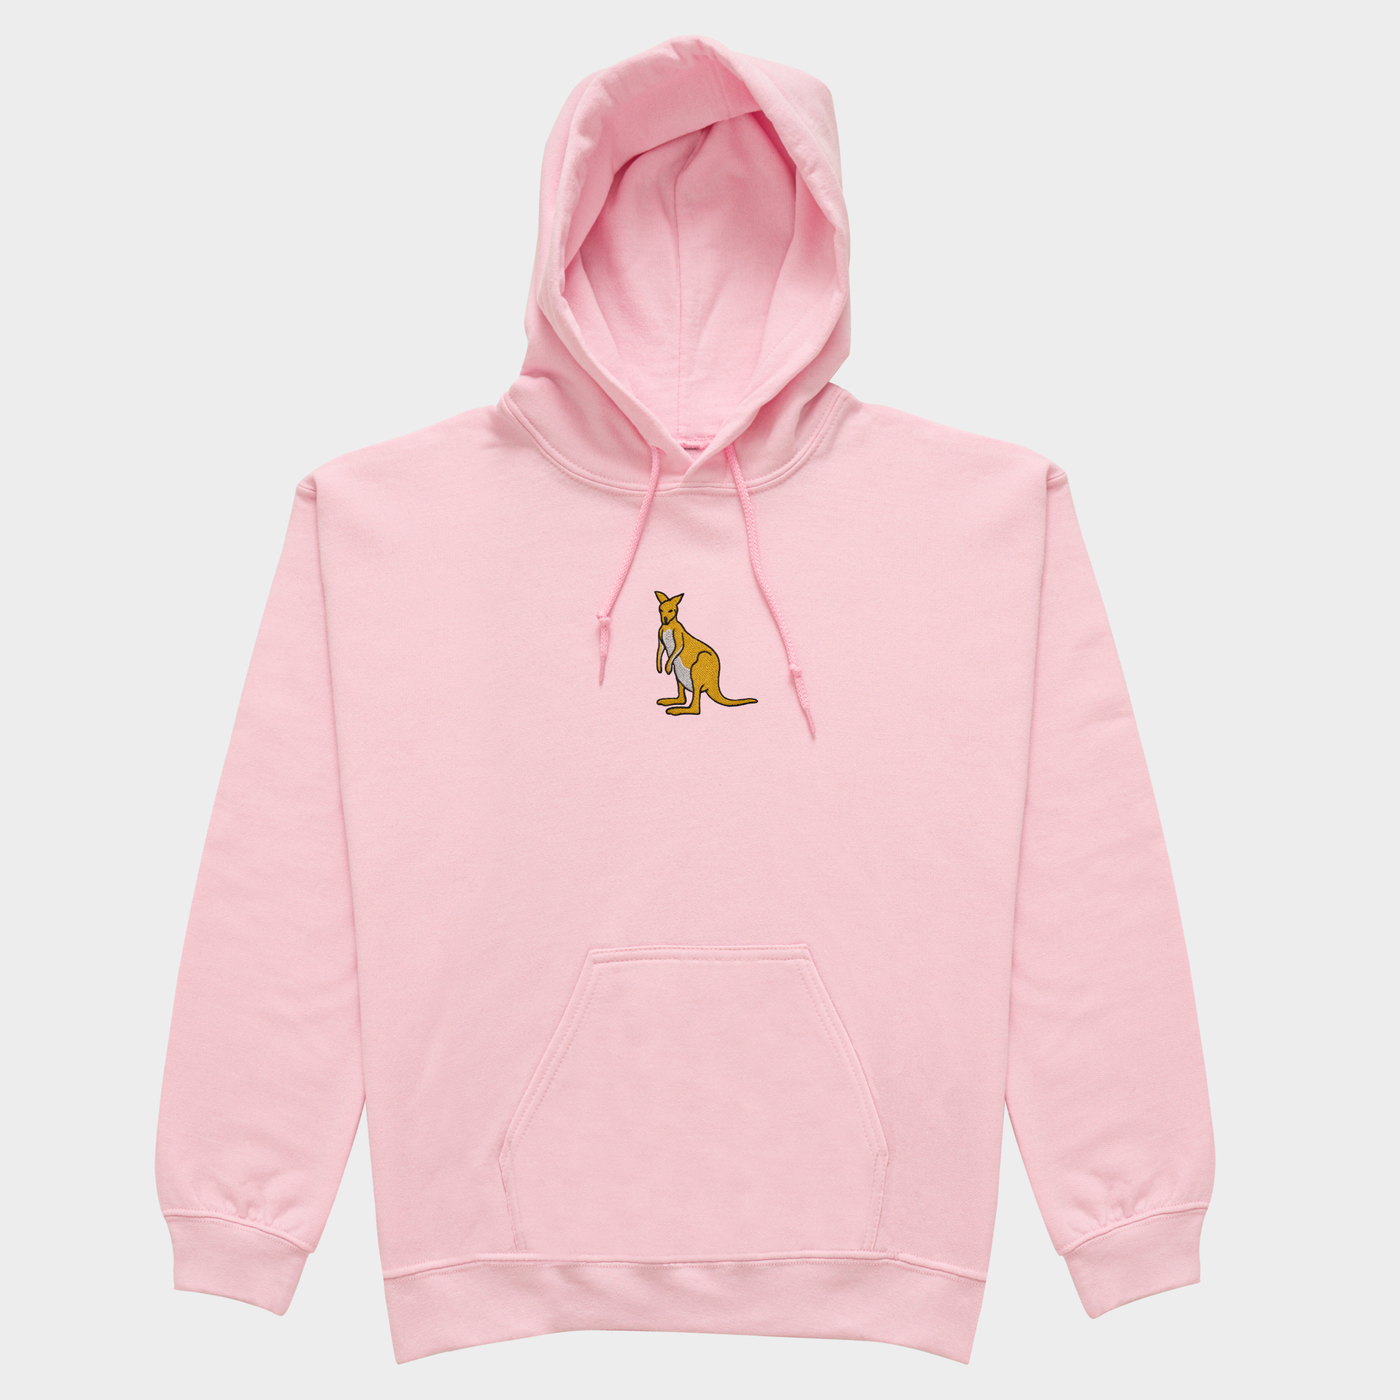 Bobby's Planet Women's Embroidered Kangaroo Hoodie from Australia Down Under Animals Collection in Light Pink Color#color_light-pink